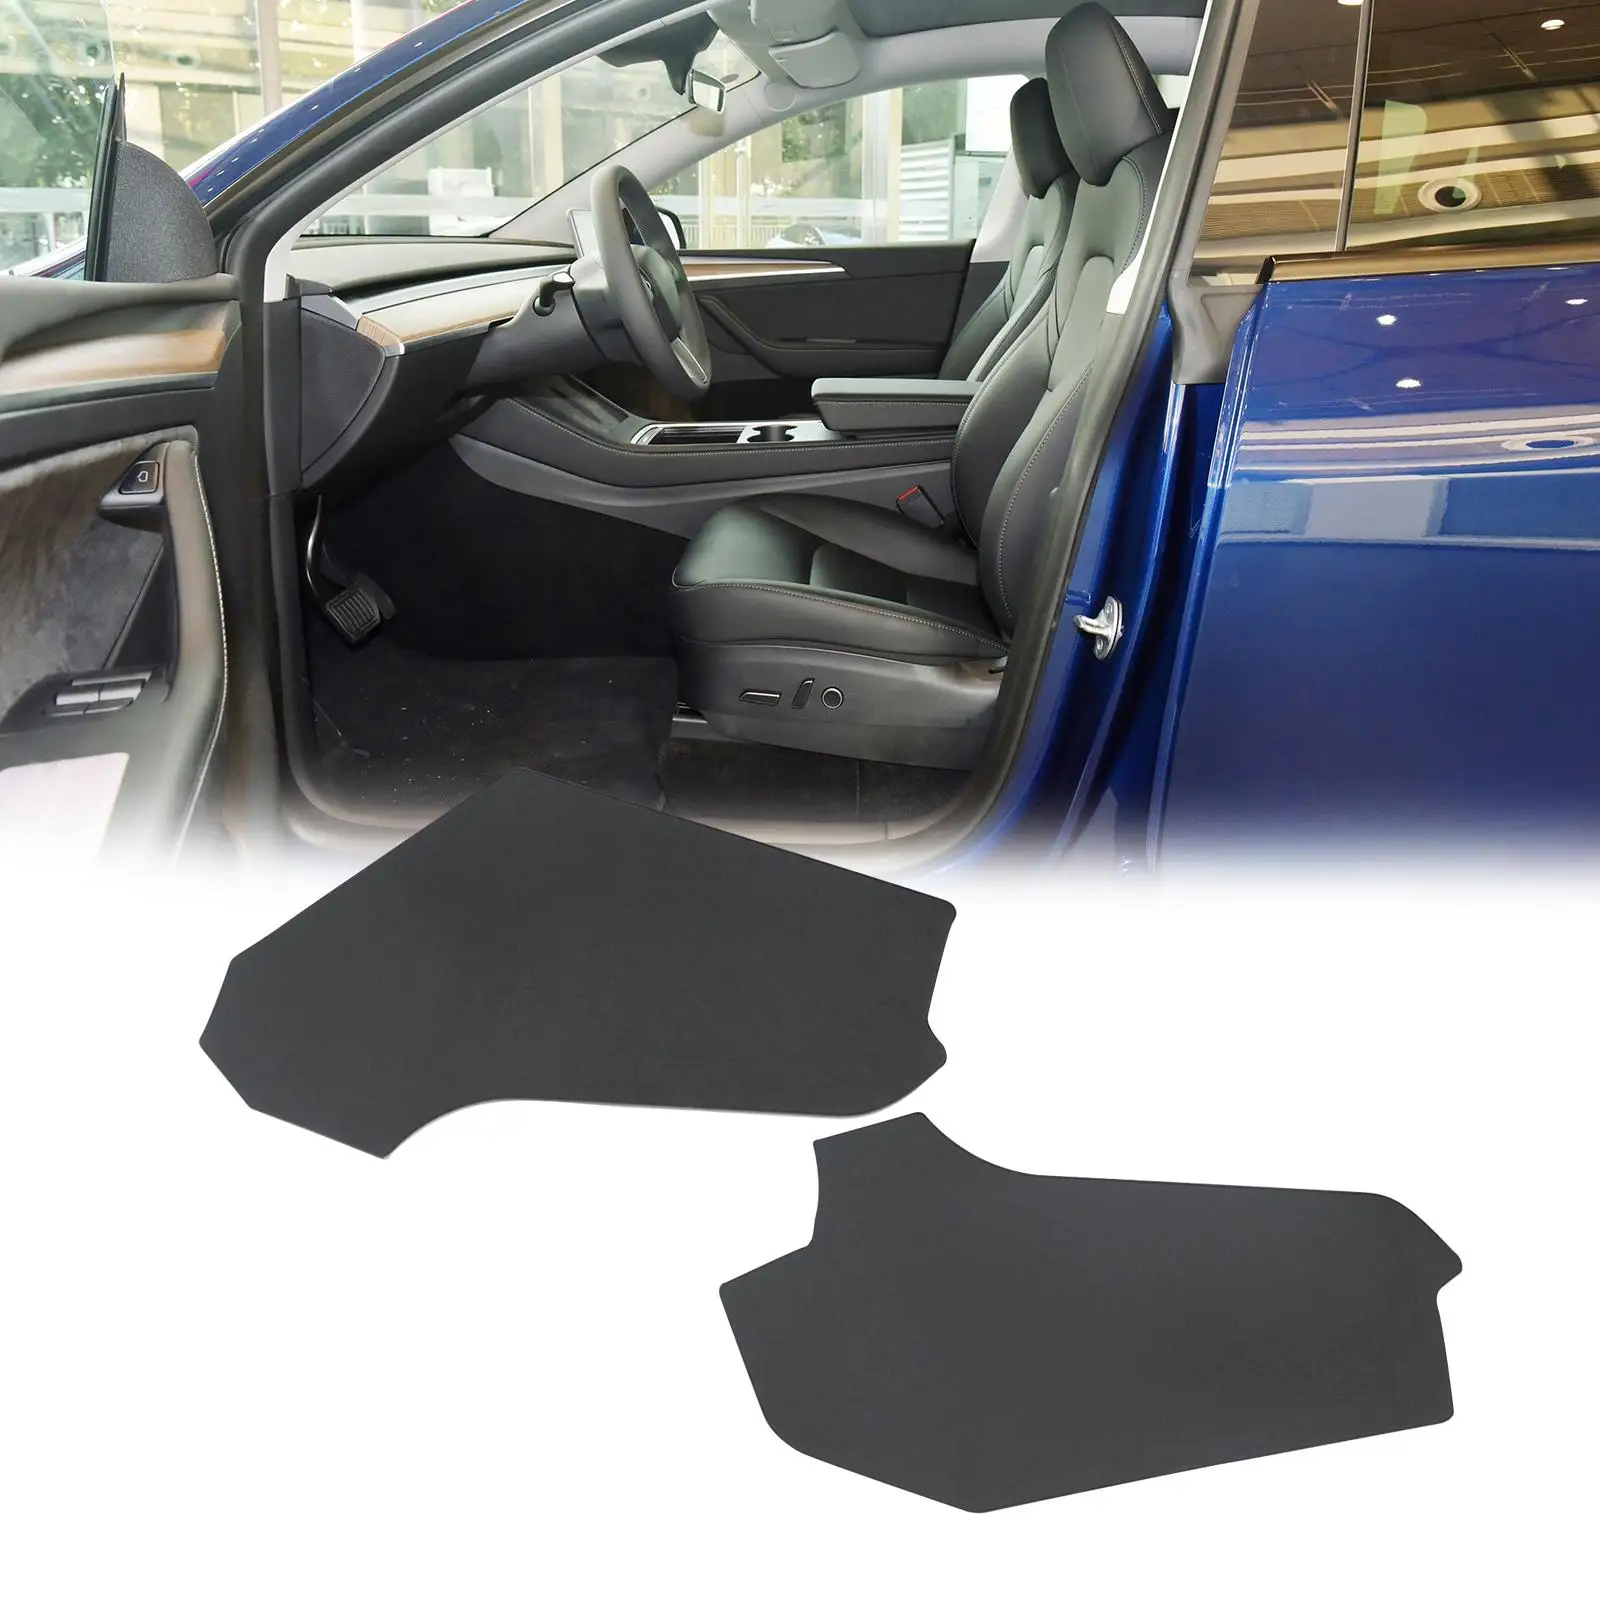 2Pcs Central Control Side Anti Kick Mat Replaces Anti Dust Mat Decoration Trim Dirt Protector Cover Pad for Tesla Model Y